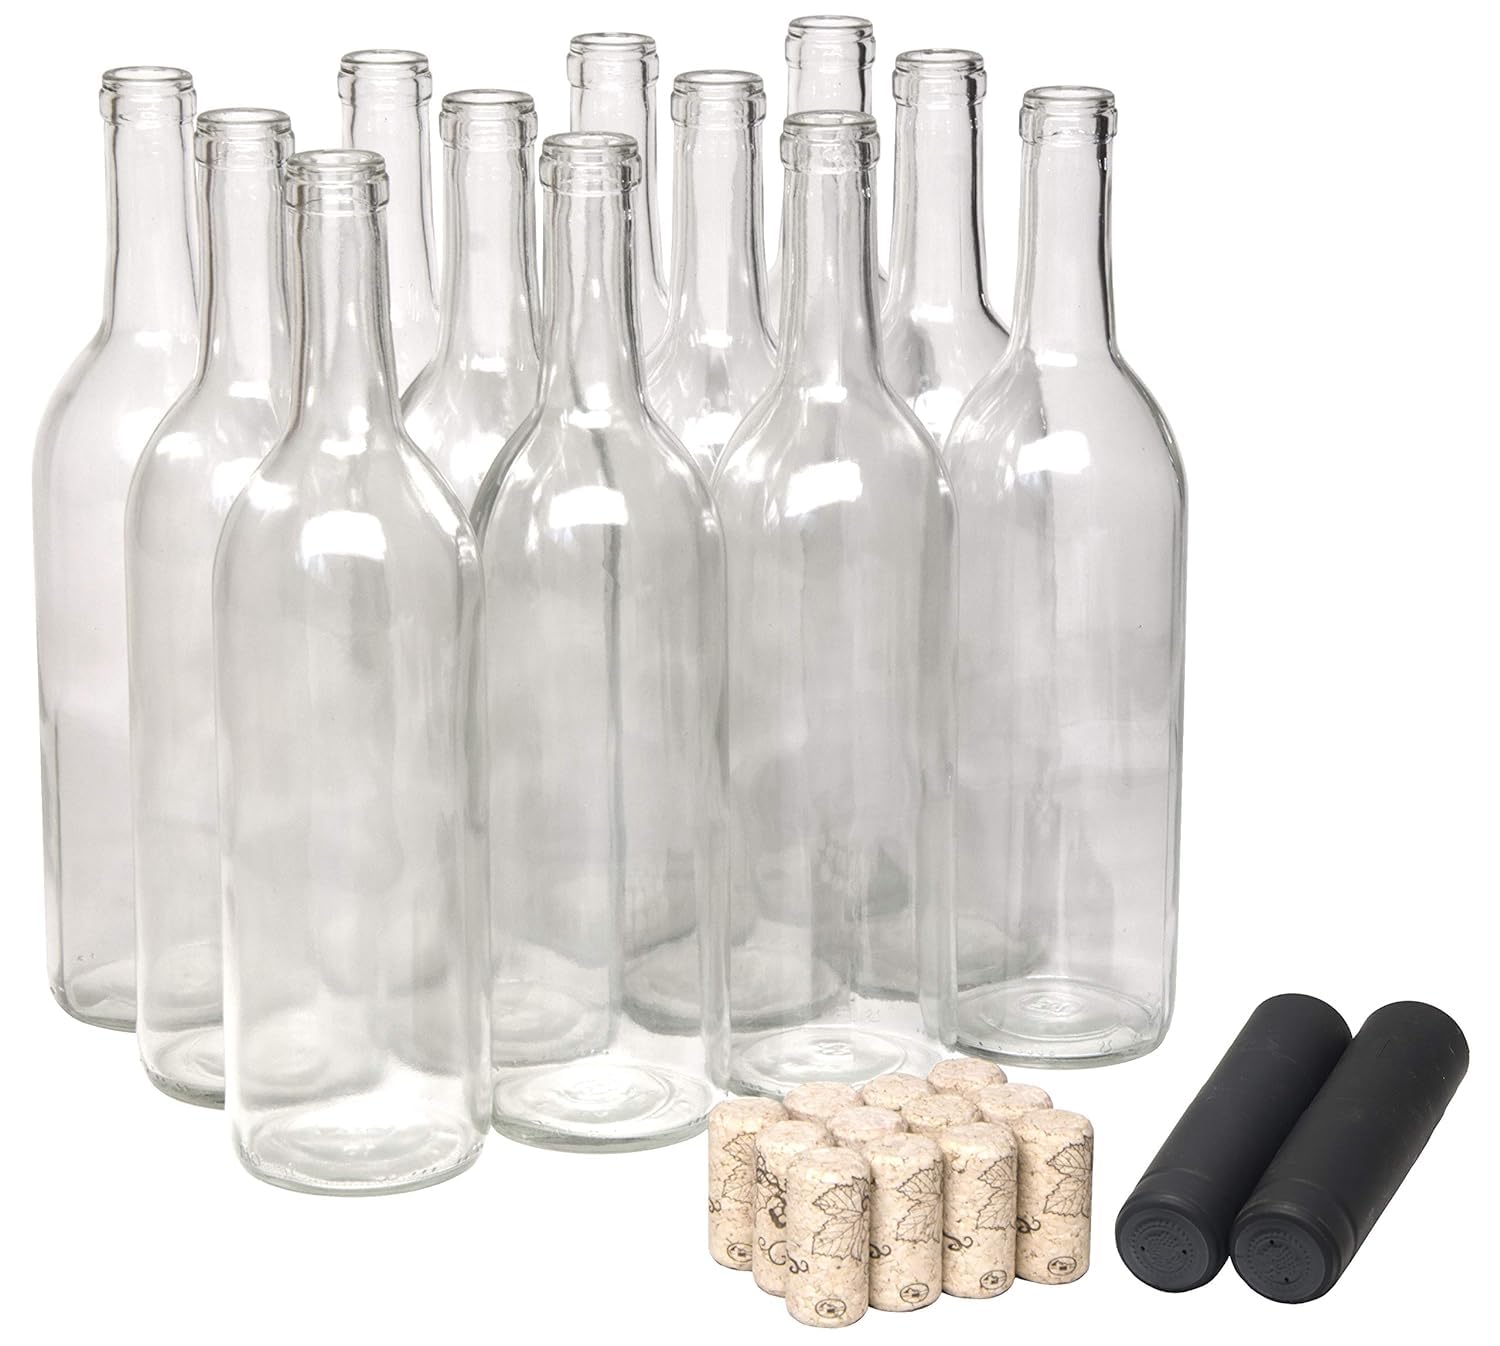 North Mountain Supply 750ml Glass Bordeaux Wine Bottle Flat-Bottomed Cork Finish - with #8 Premium Natural Corks & PVC Shrink Capsules - Case of 12